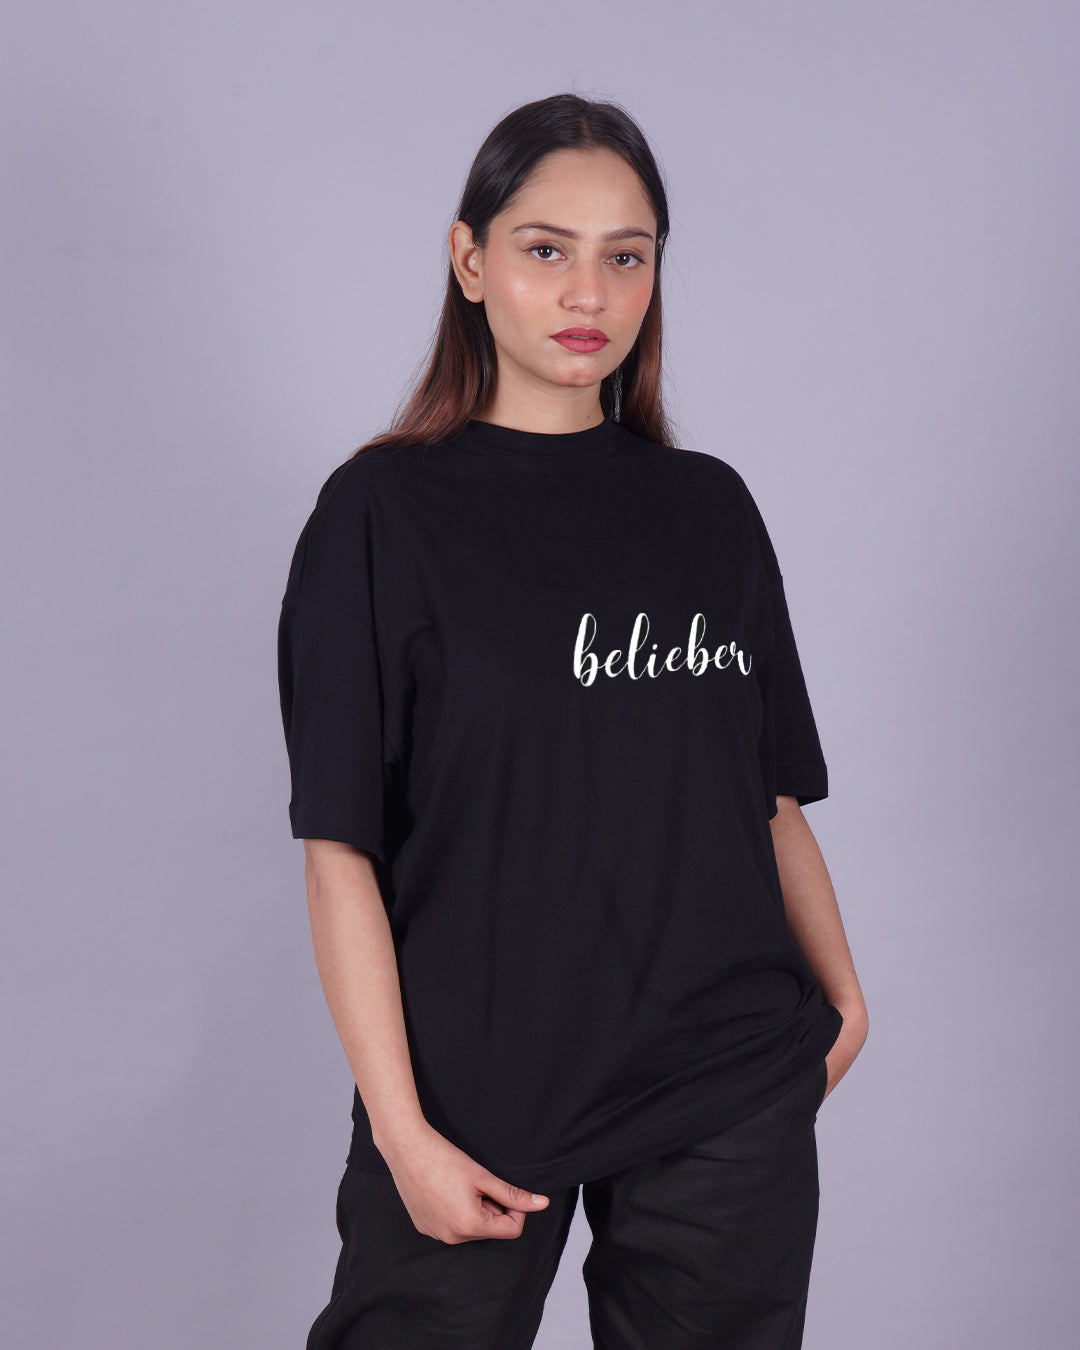 Heartbreaker & What Do You Mean: Women's Pack of 2 Justin Bieber Oversized Tops